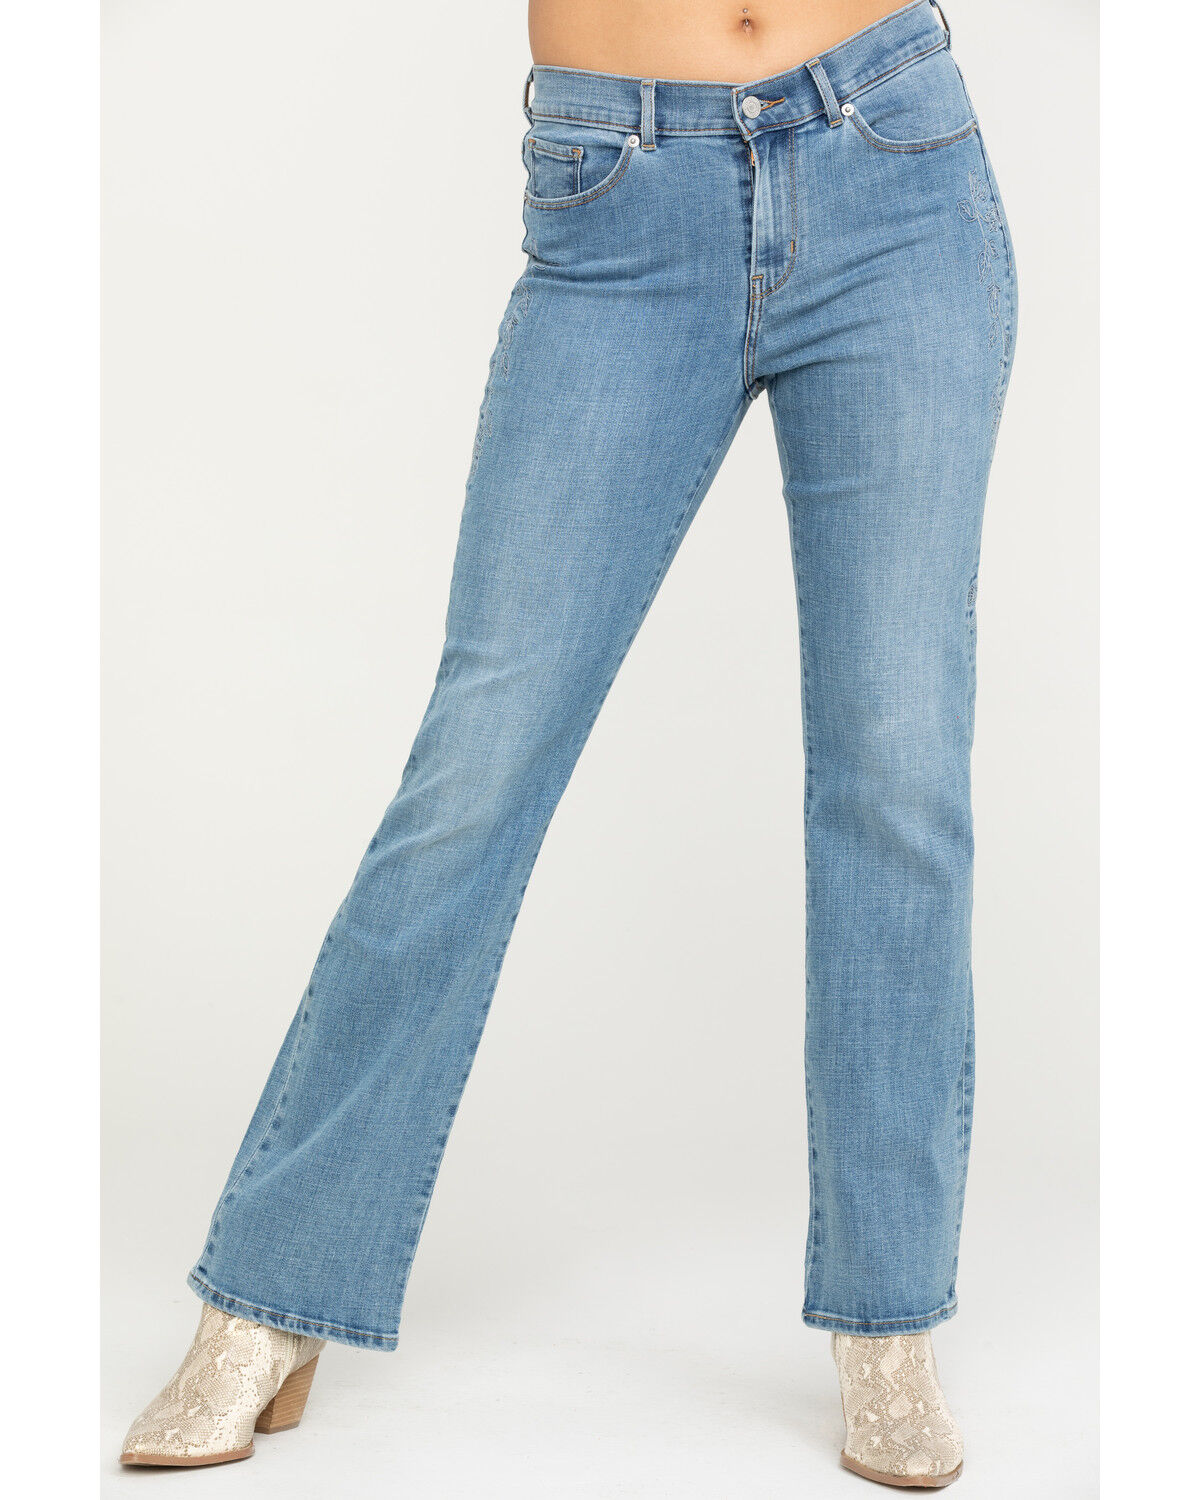 levi's classic bootcut jeans womens